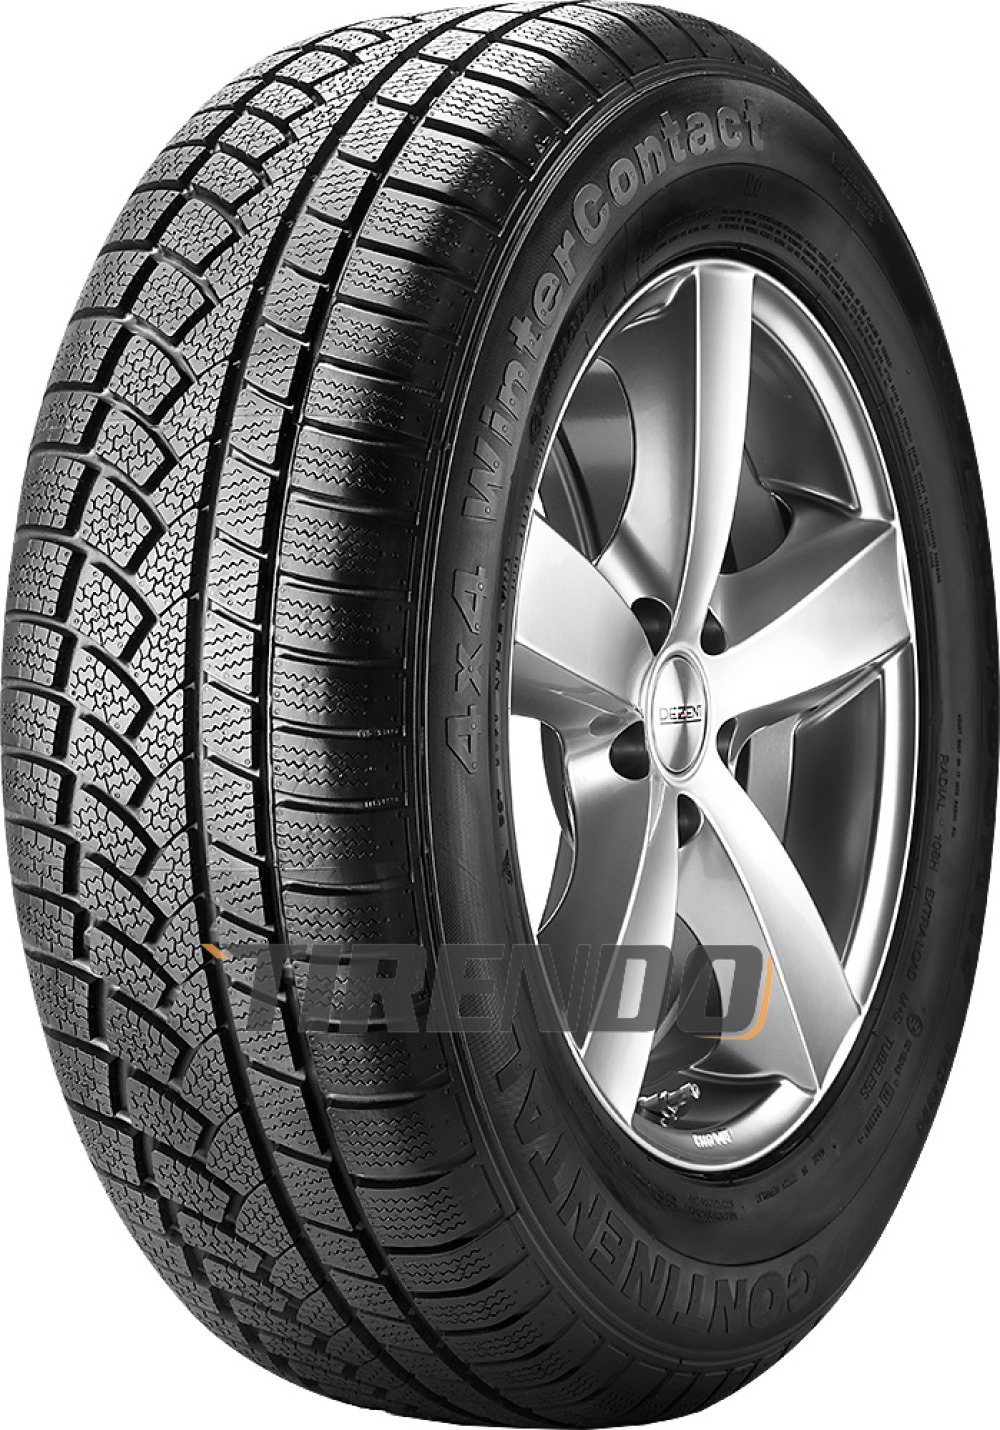 Image of Continental 4X4 WinterContact ( 235/60 R18 107H XL )